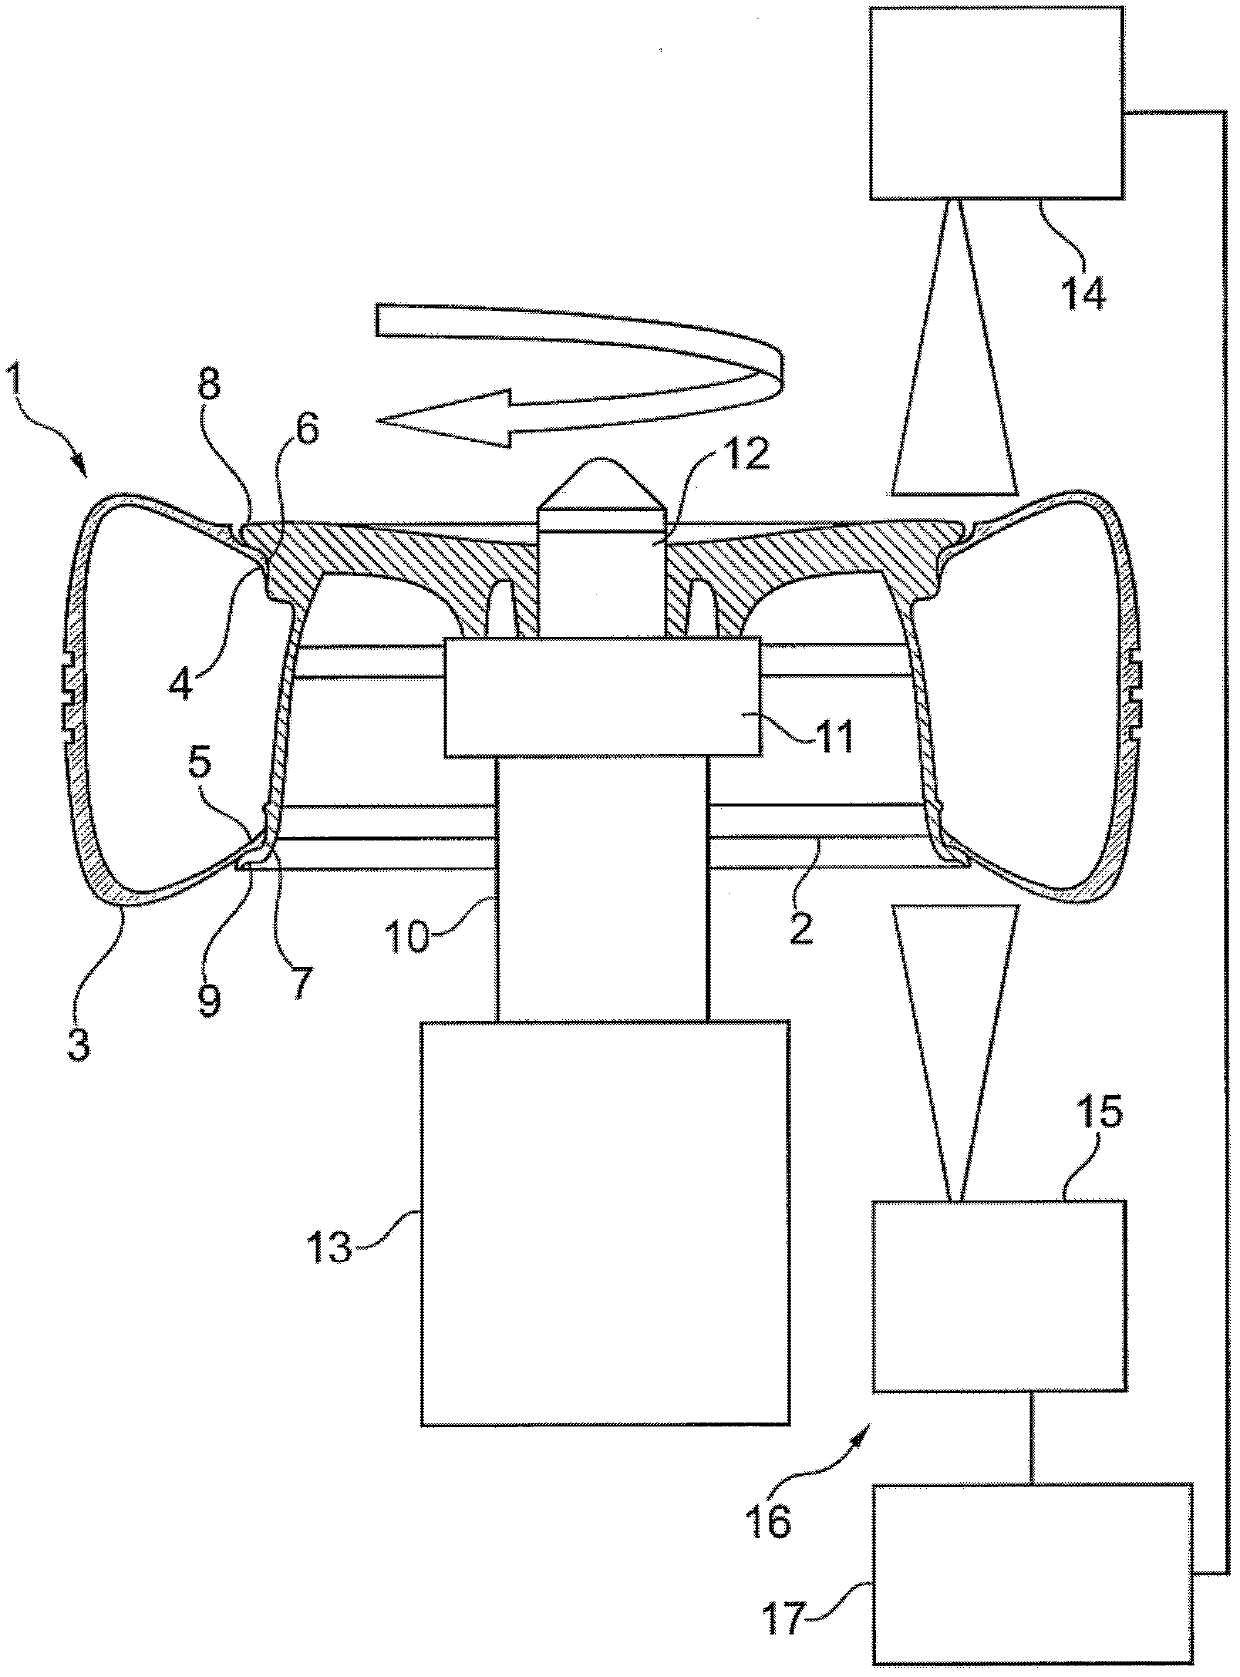 Method and device for checking the tyre seat on vehicle wheels